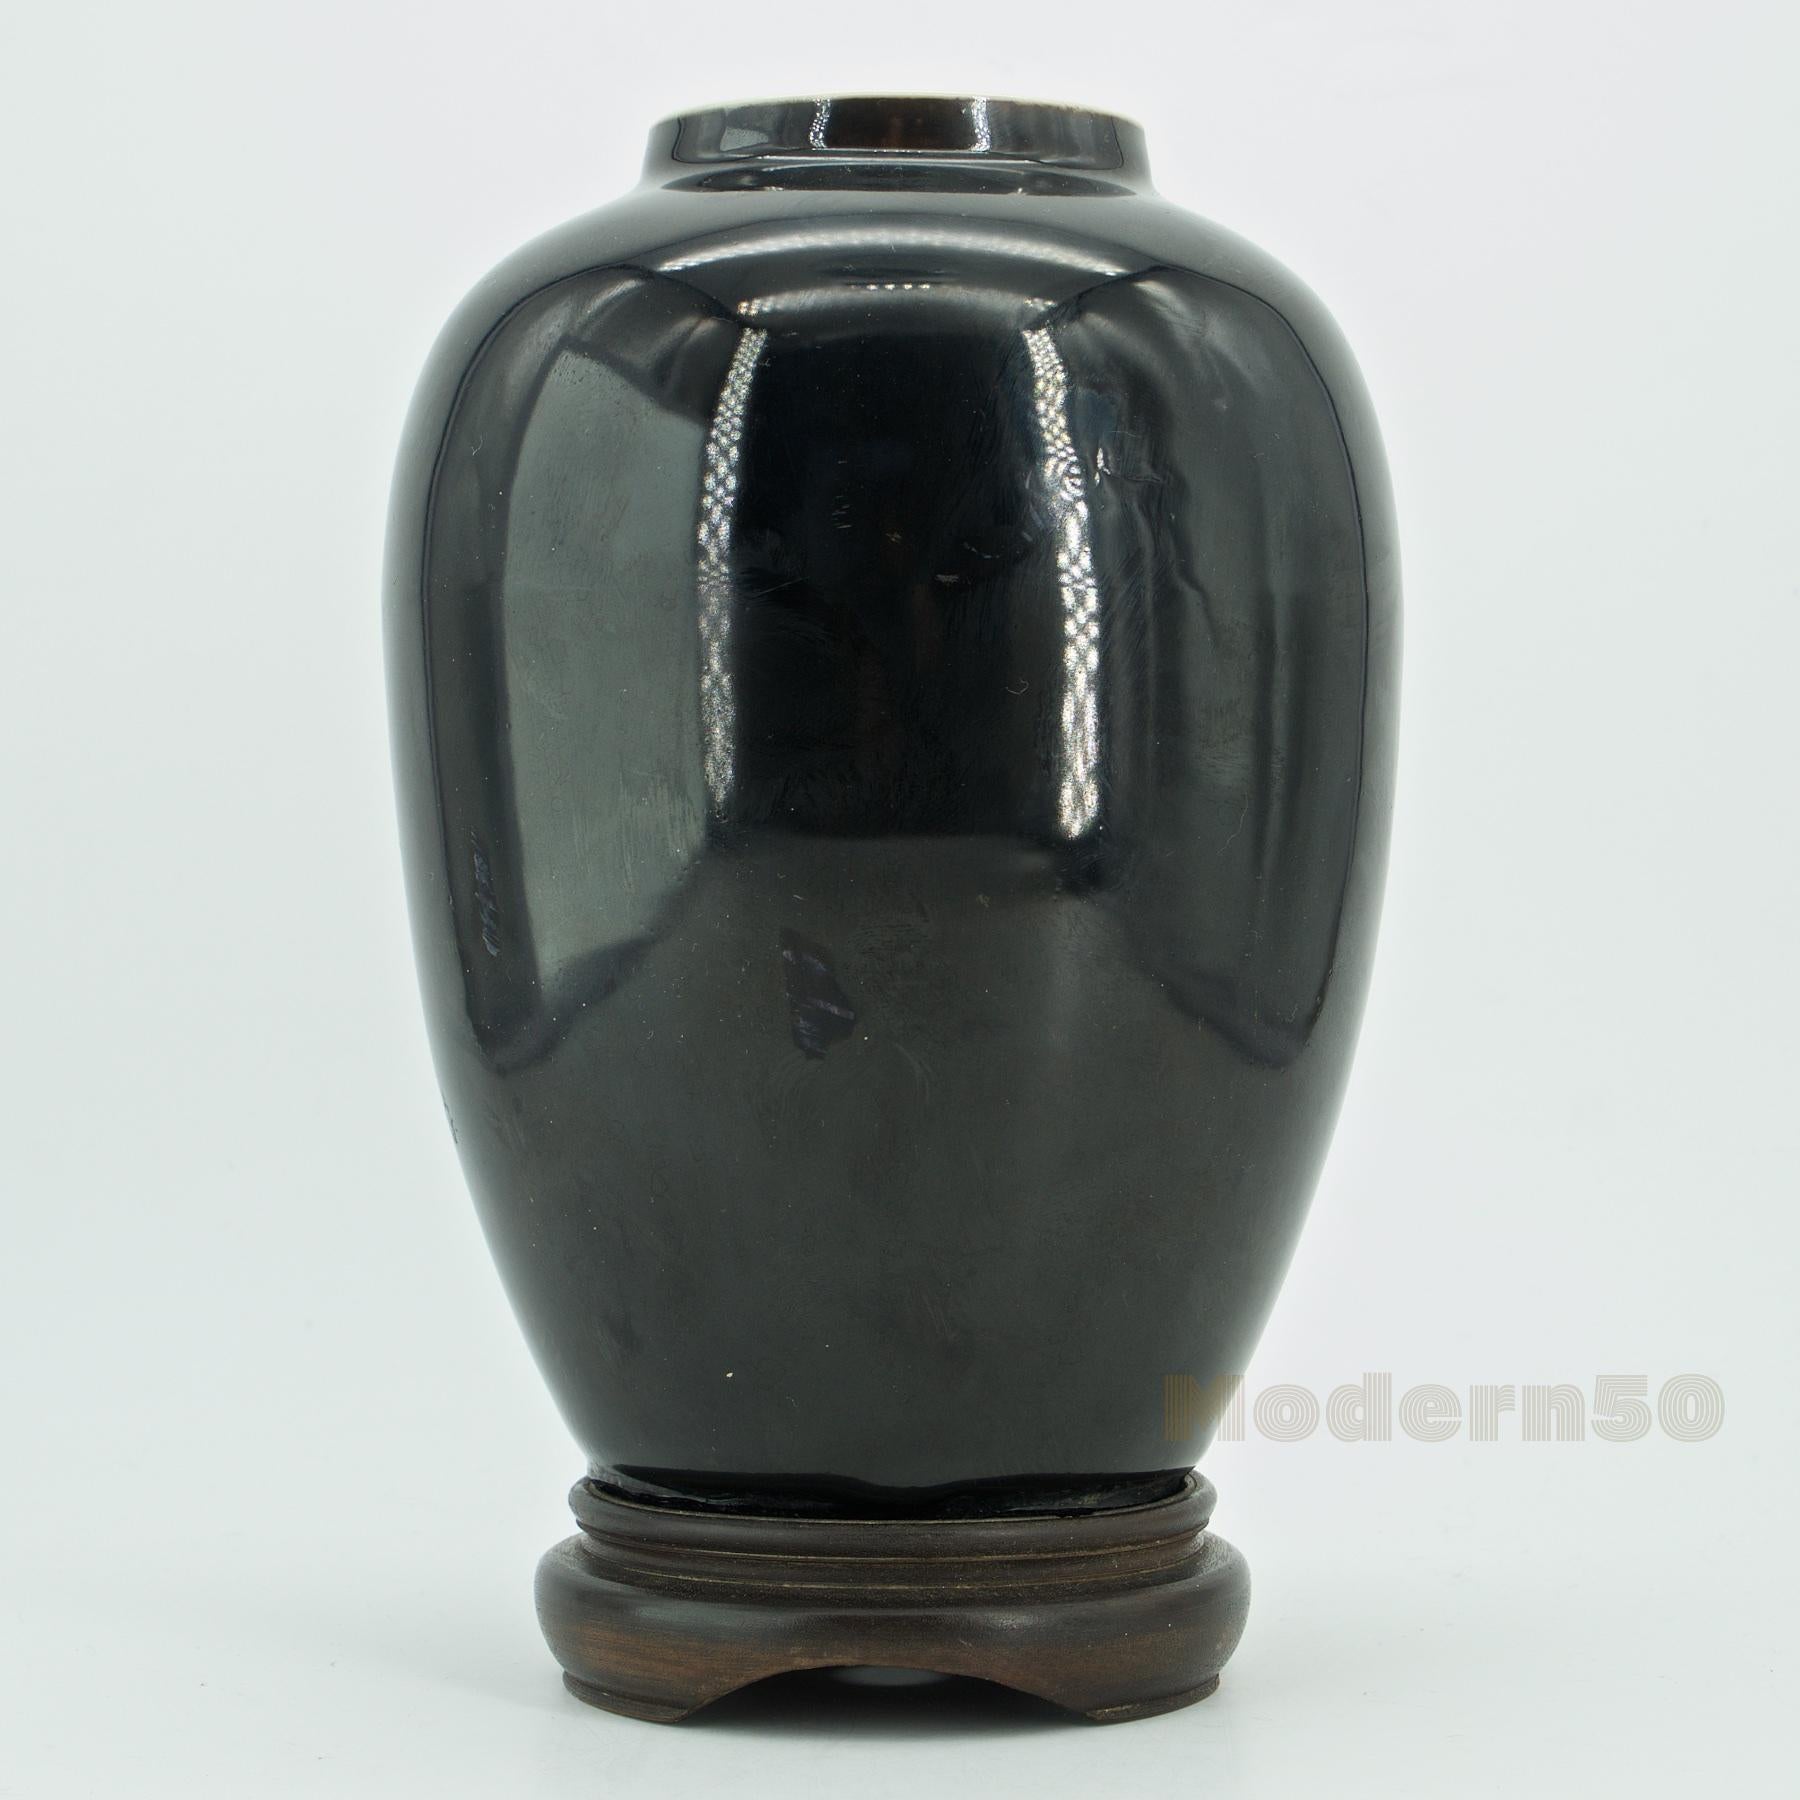 Late 19th century Chinese ‘black mirror' porcelain vase, Kangxi marks to the underside of the base, Late Qing dynasty. Puncture to bottom, was found as a lamp. Height without stand is 7 inches.